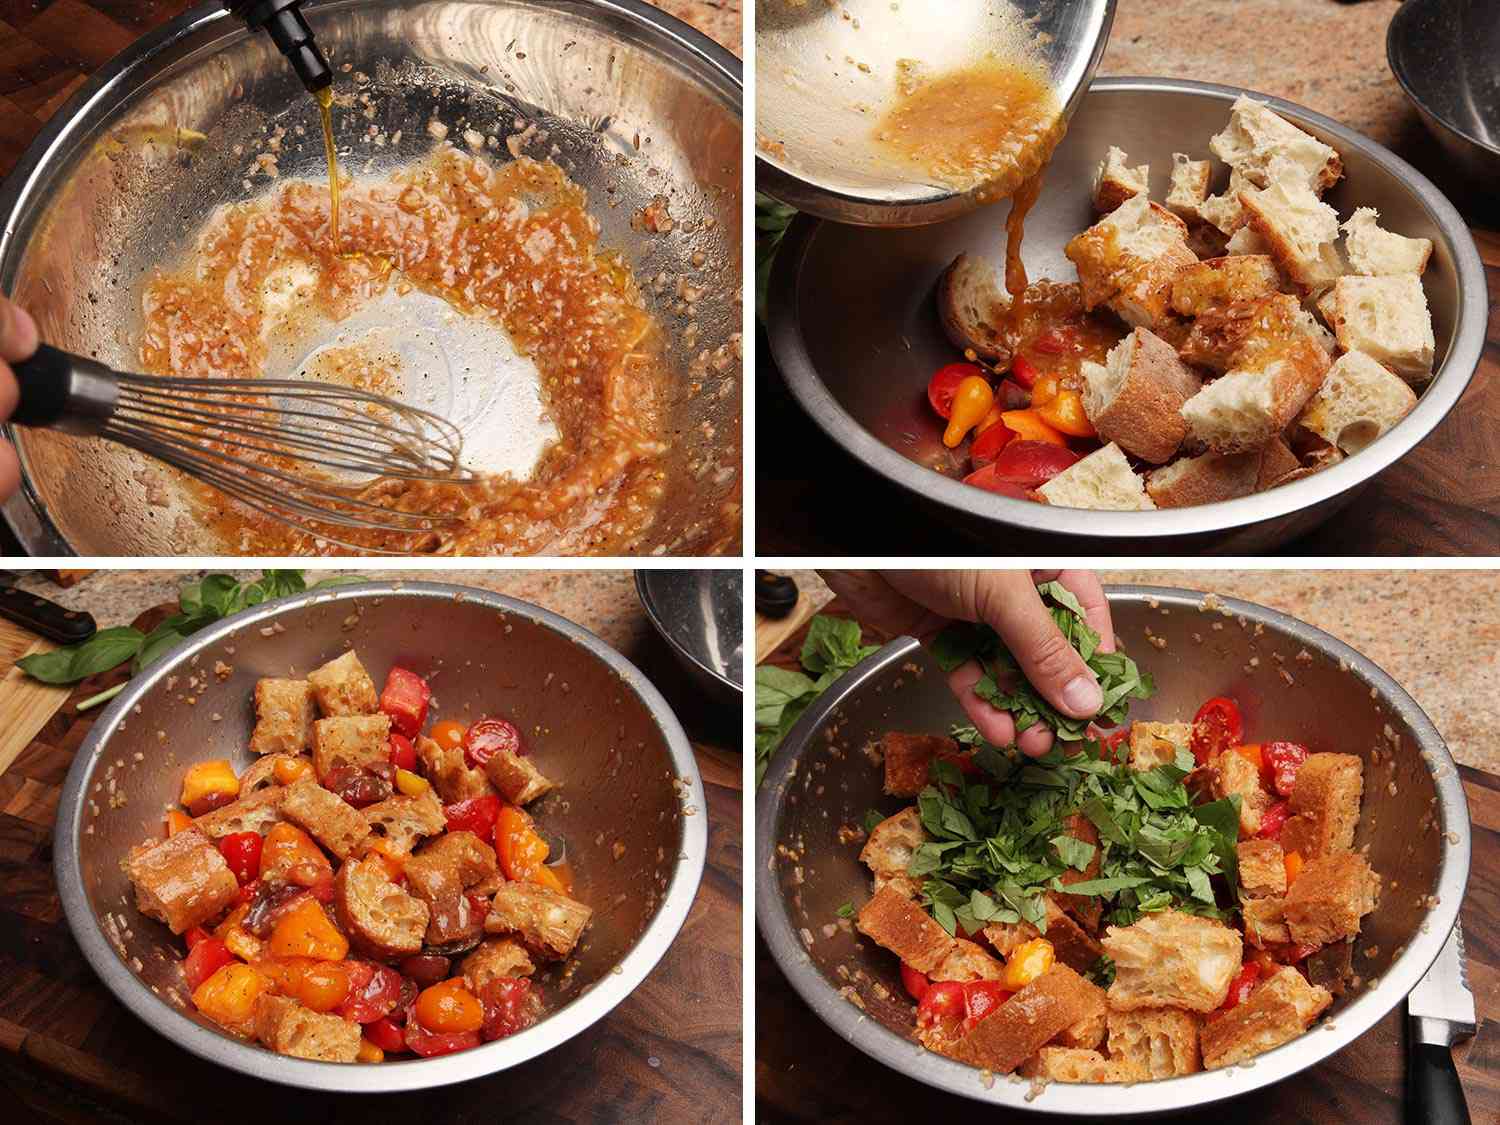 Collage of photos of making panzanella salad: whisking olive oil and tomato juice in a large bowl to make a vinaigrette, pouring vinaigrette over tomatoes and bread, tomatoes and bread soaked in vinaigrette, adding chopped basil leaves to salad